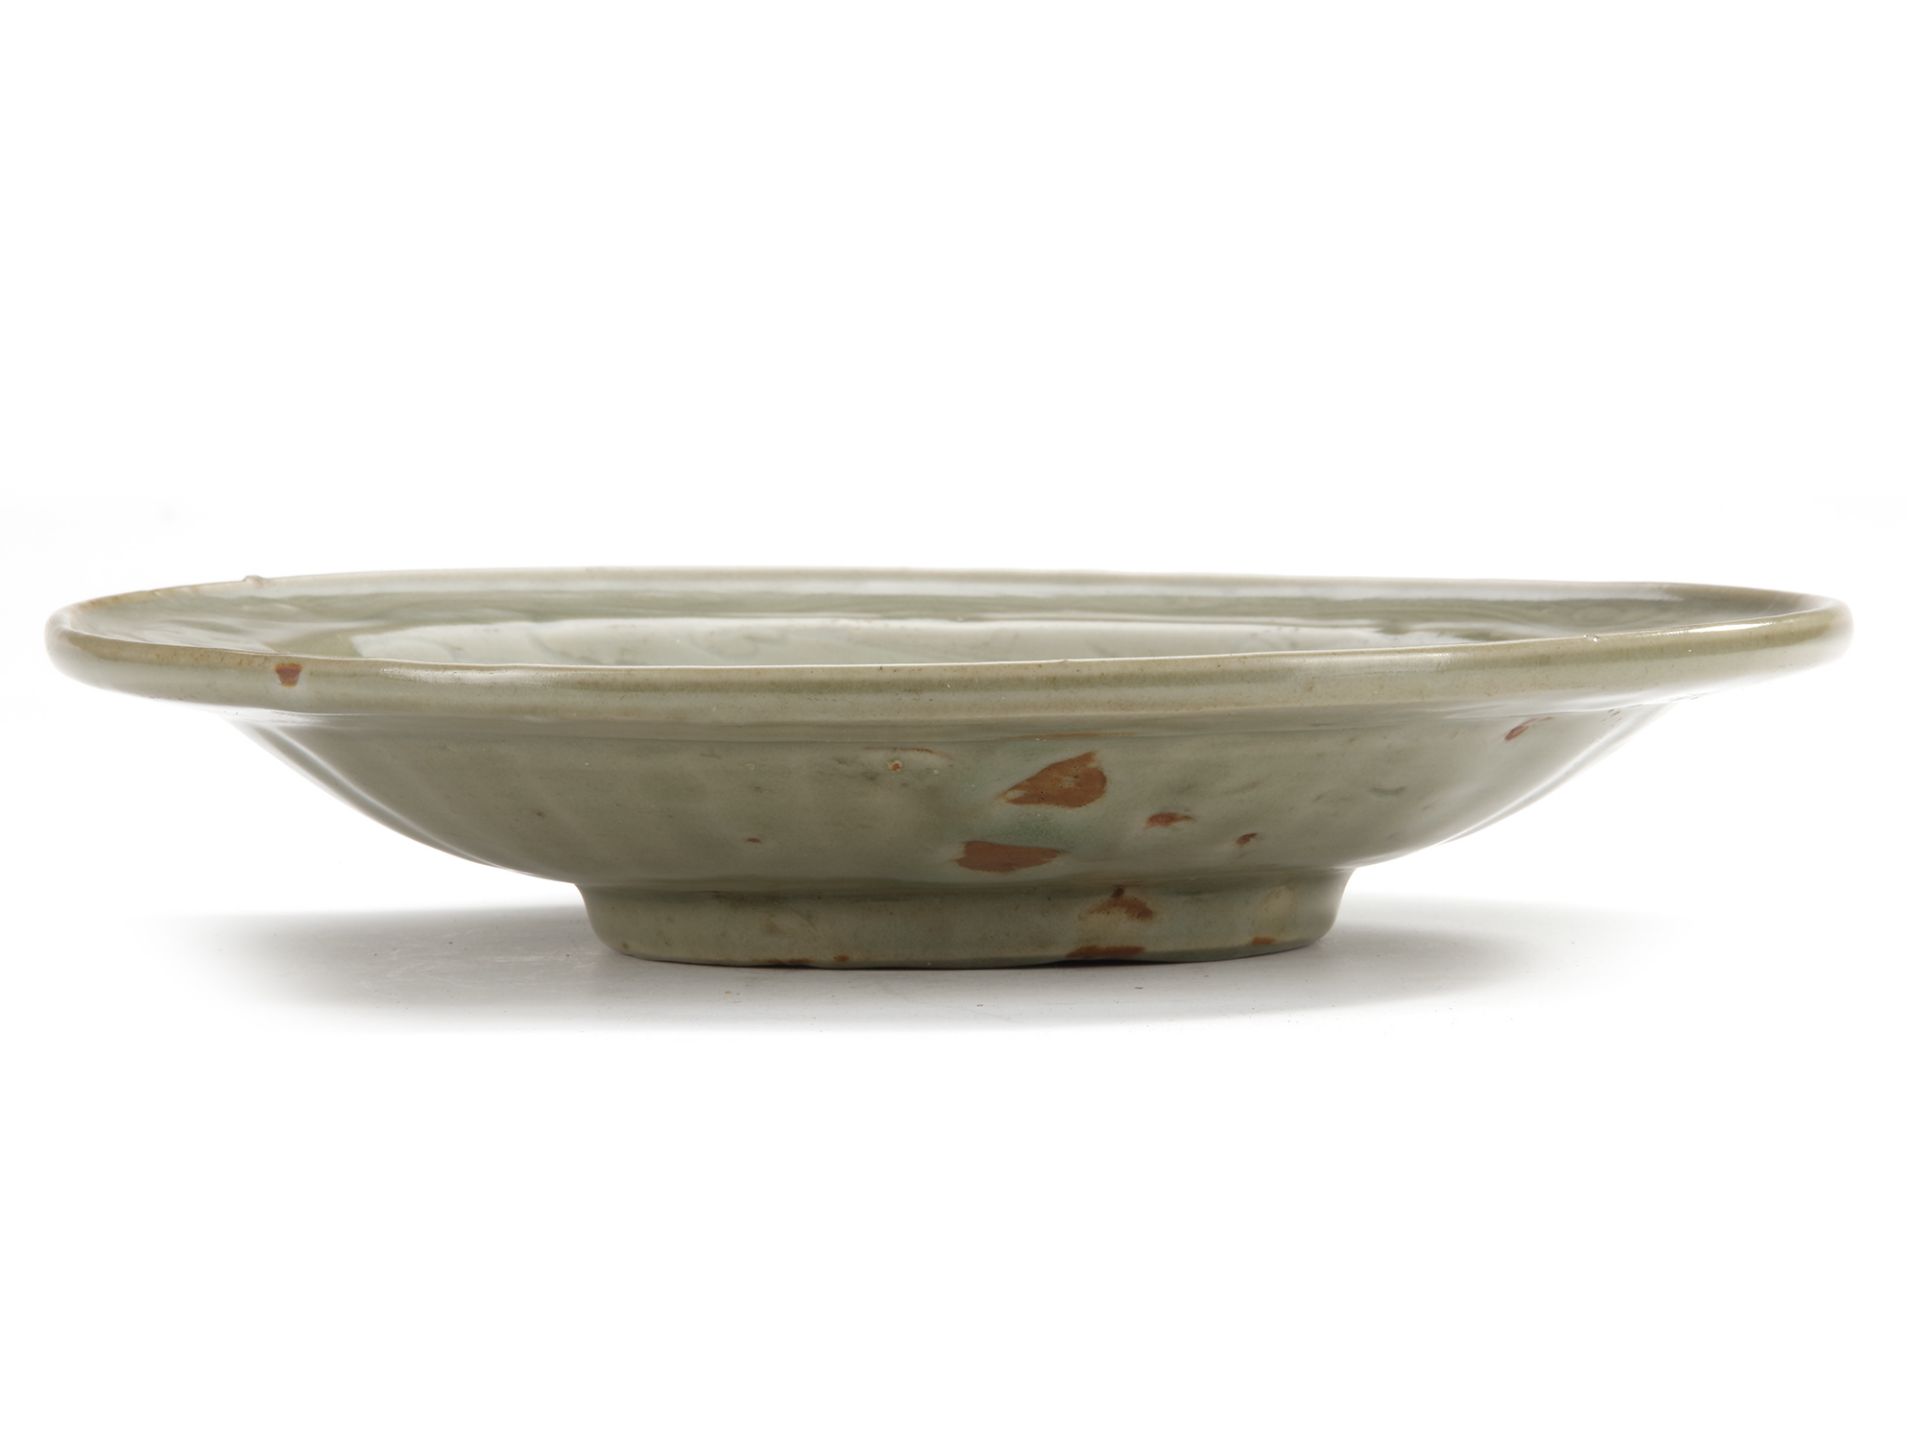 A CHINESE LONGQUAN DISH, MING DYNASTY (1368-1644) - Image 3 of 3